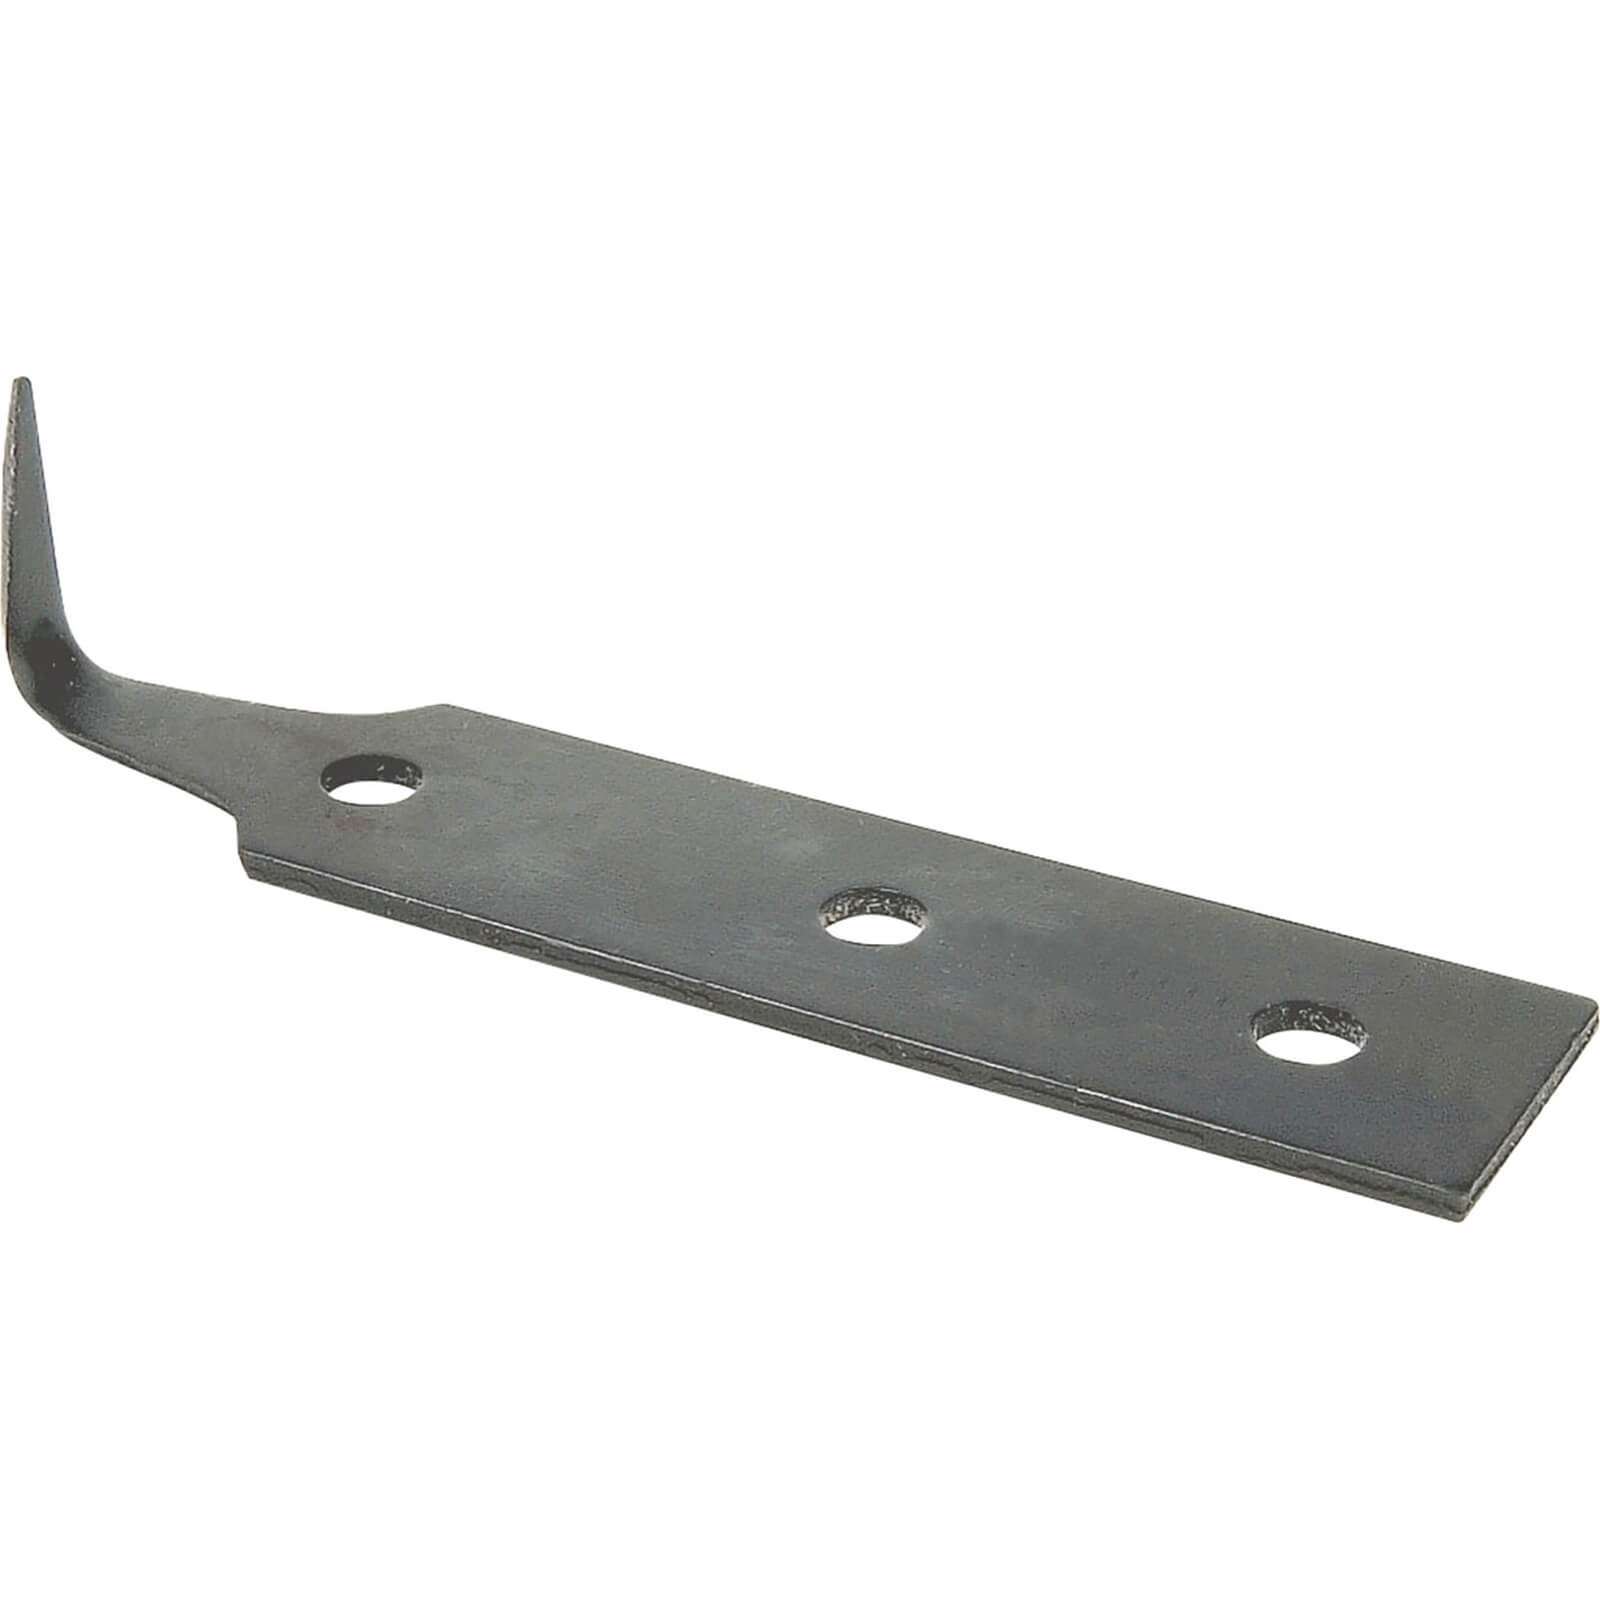 Image of Draper Windscreen Removal Tool Blade 19mm